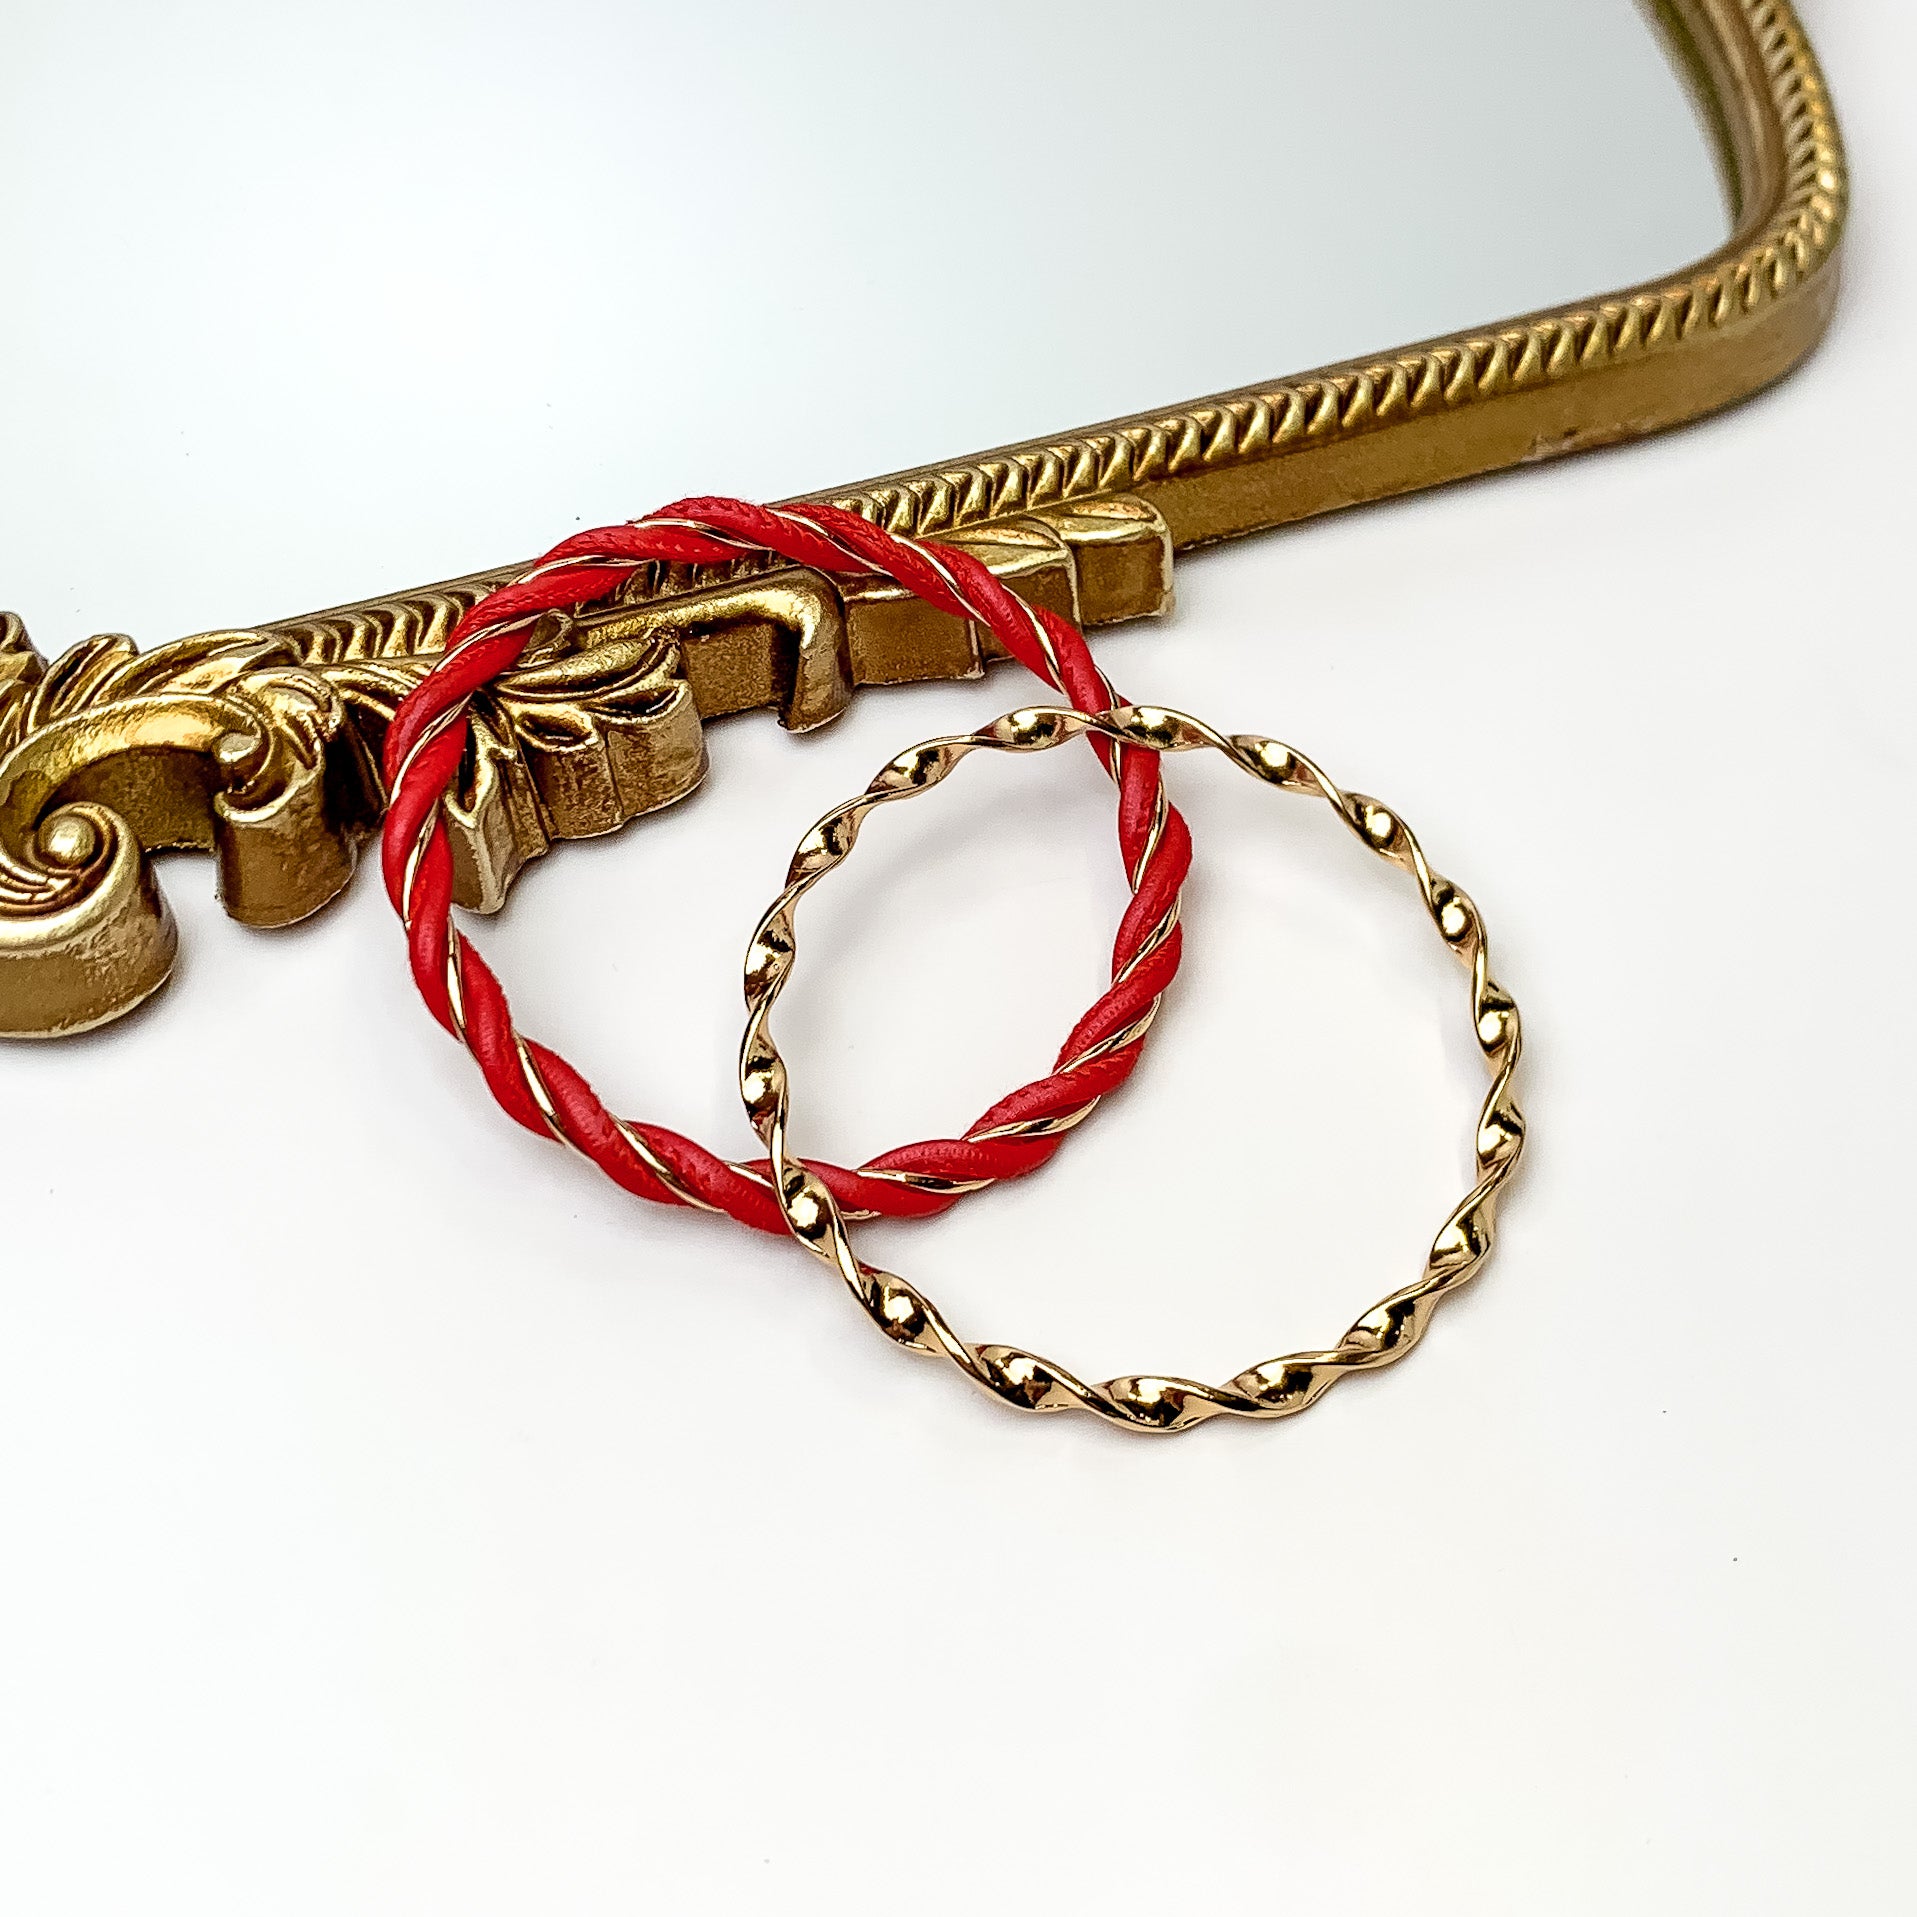 Pictured is a gold twist bangle and gold and red twist bangle. These bangles are pictured partially leaning on a gold mirror on a white background. 